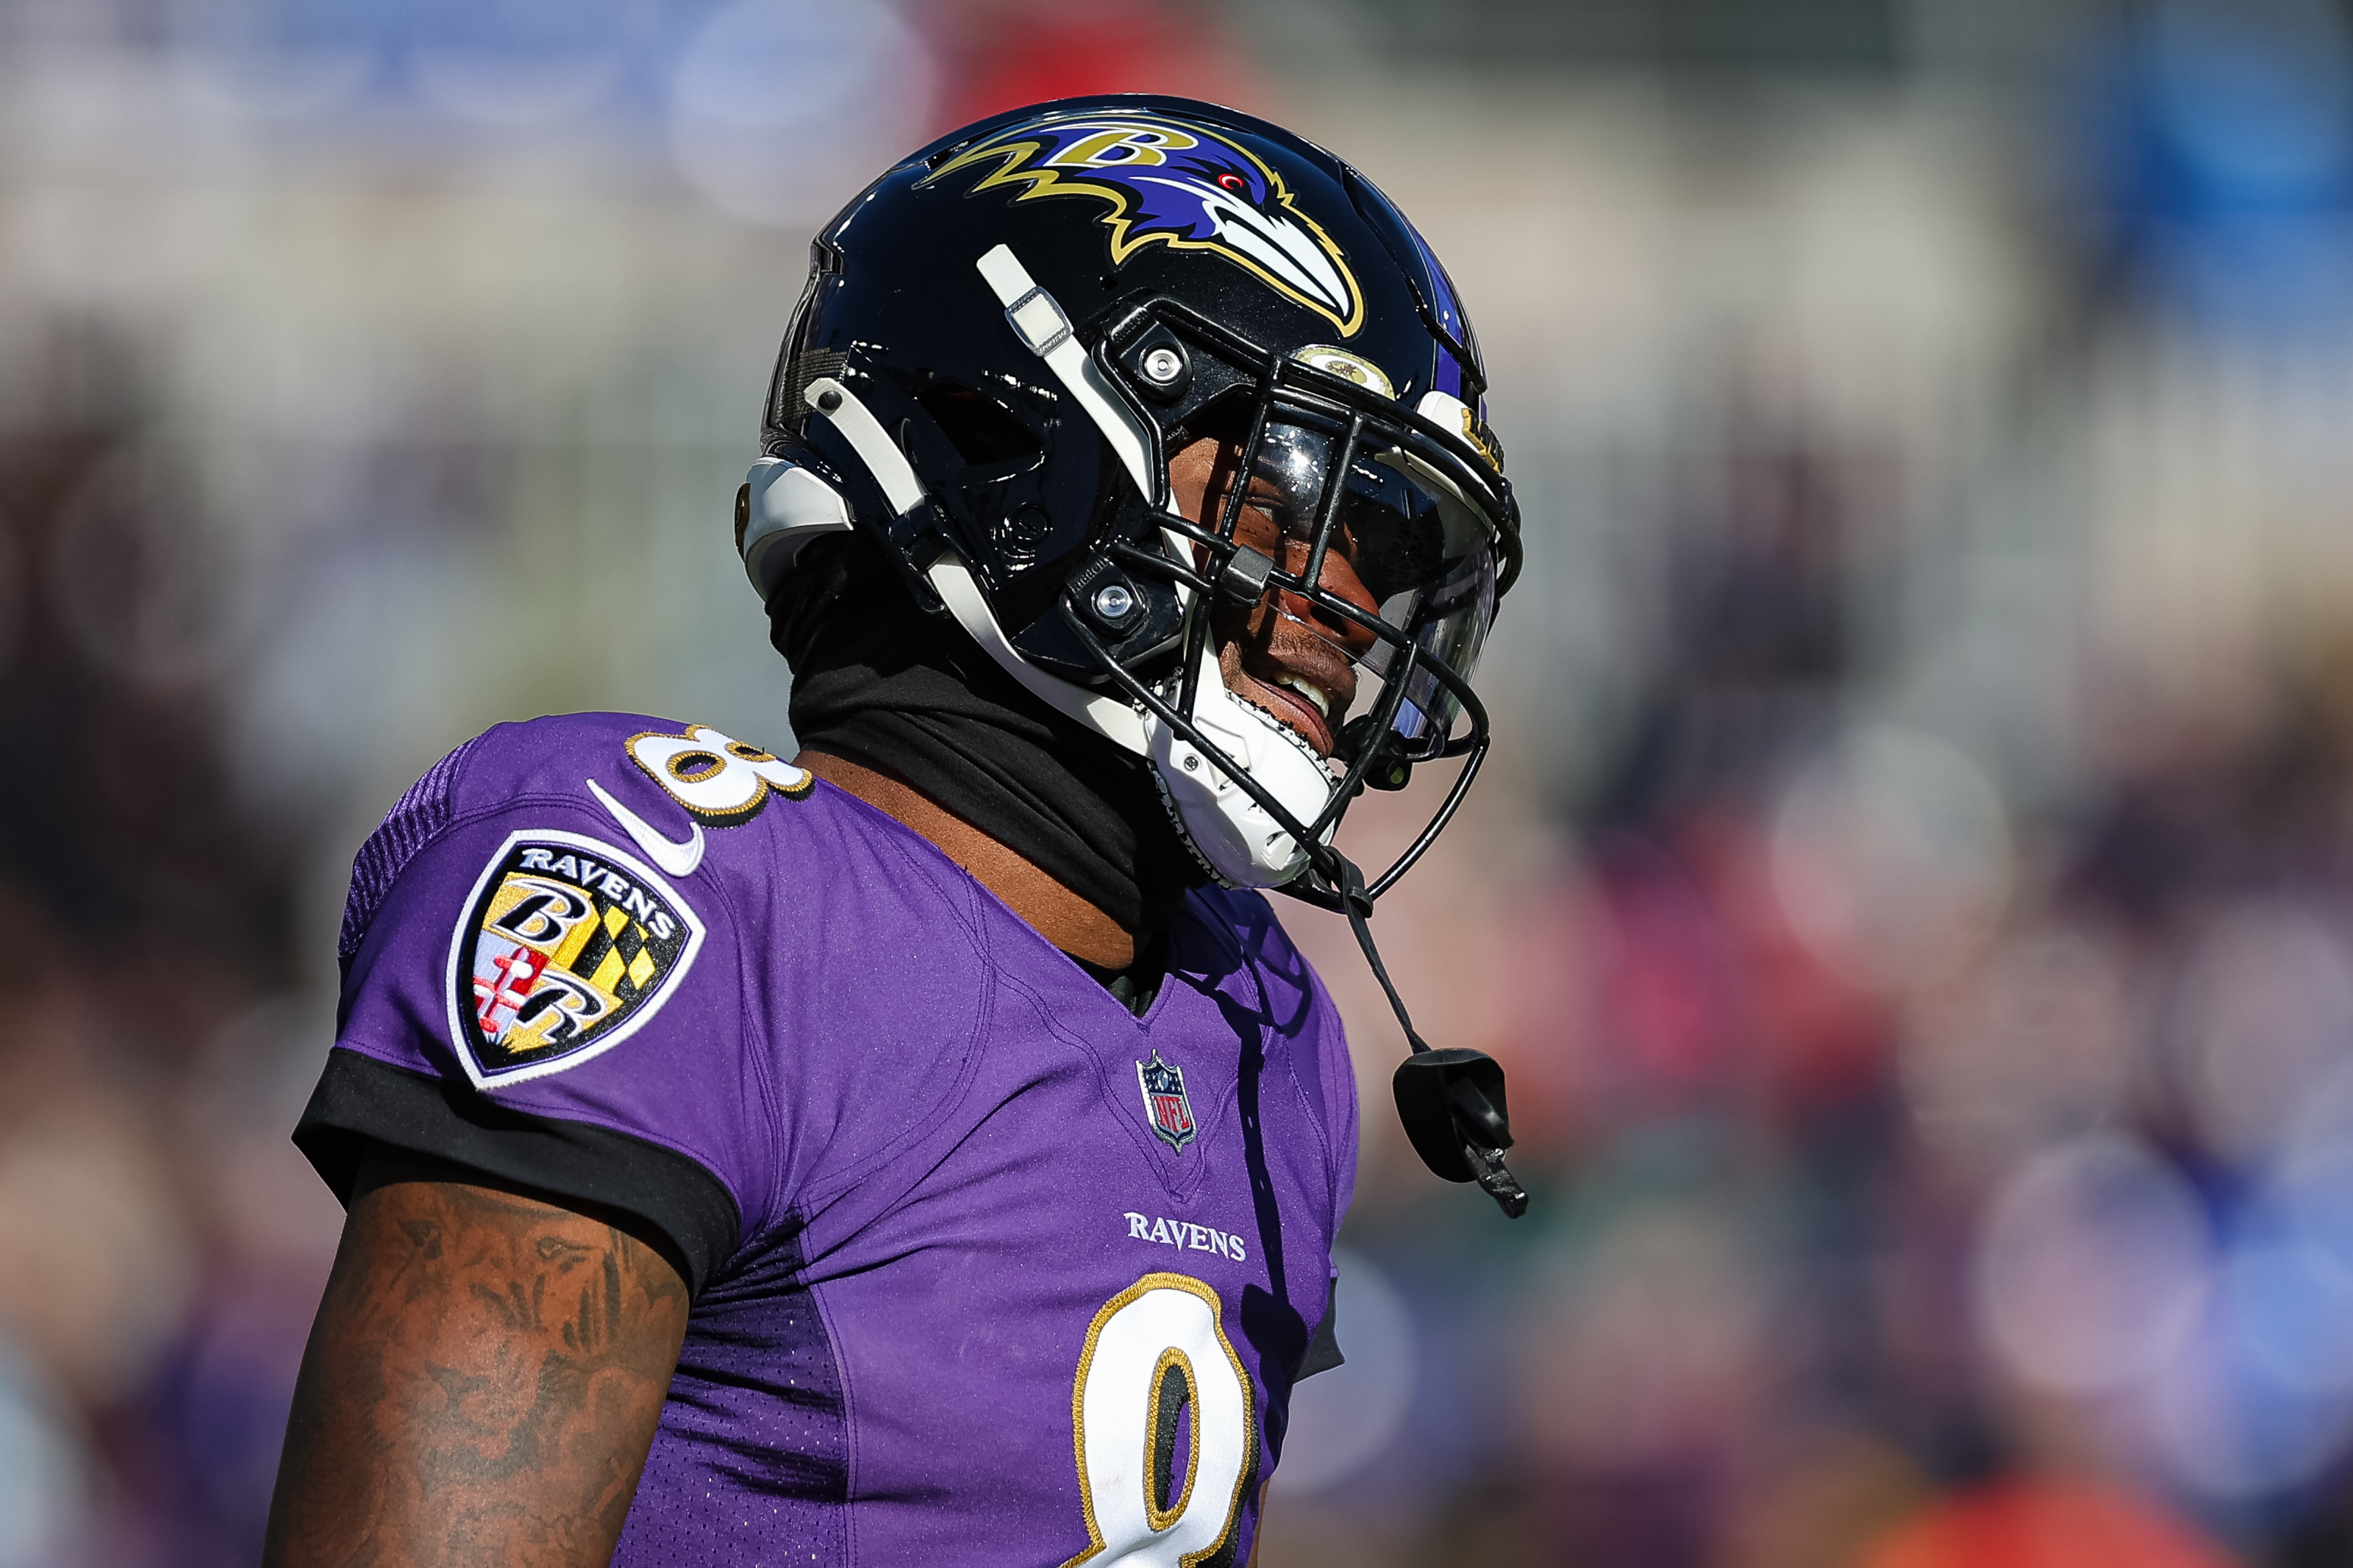 Ravens appear to be planning for future without Lamar Jackson